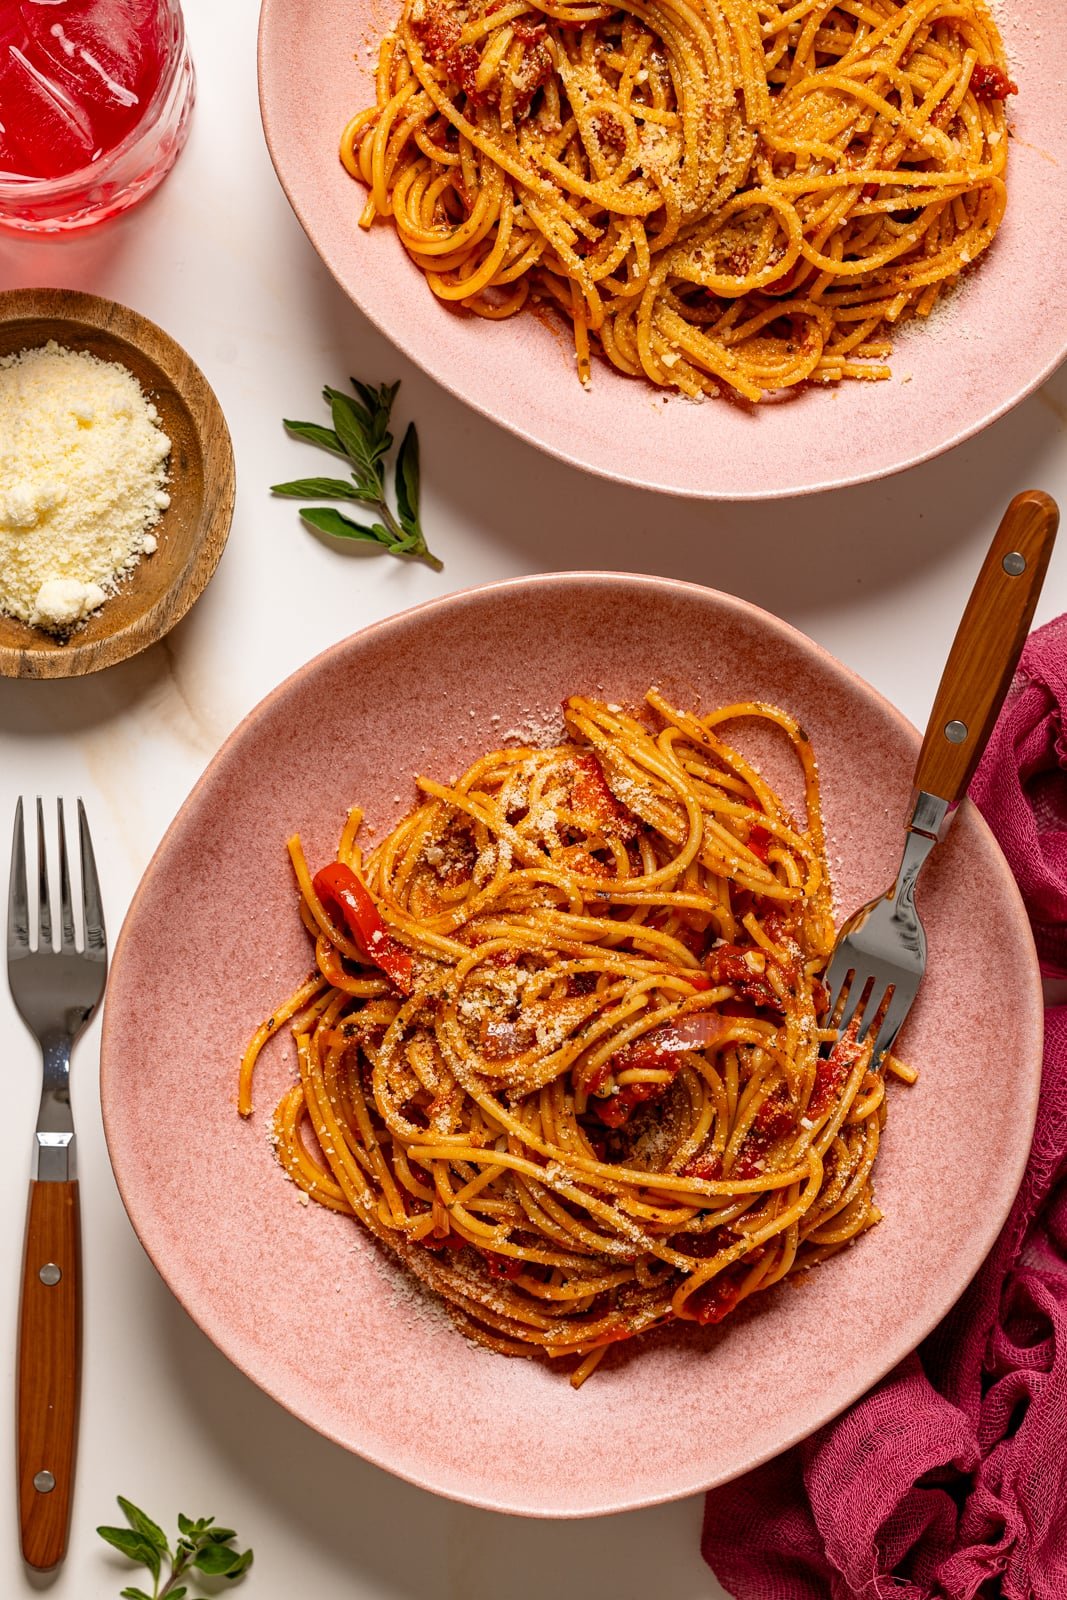 Spaghetti in two pink plates with a fork and a fork on the side and parmesan cheese.